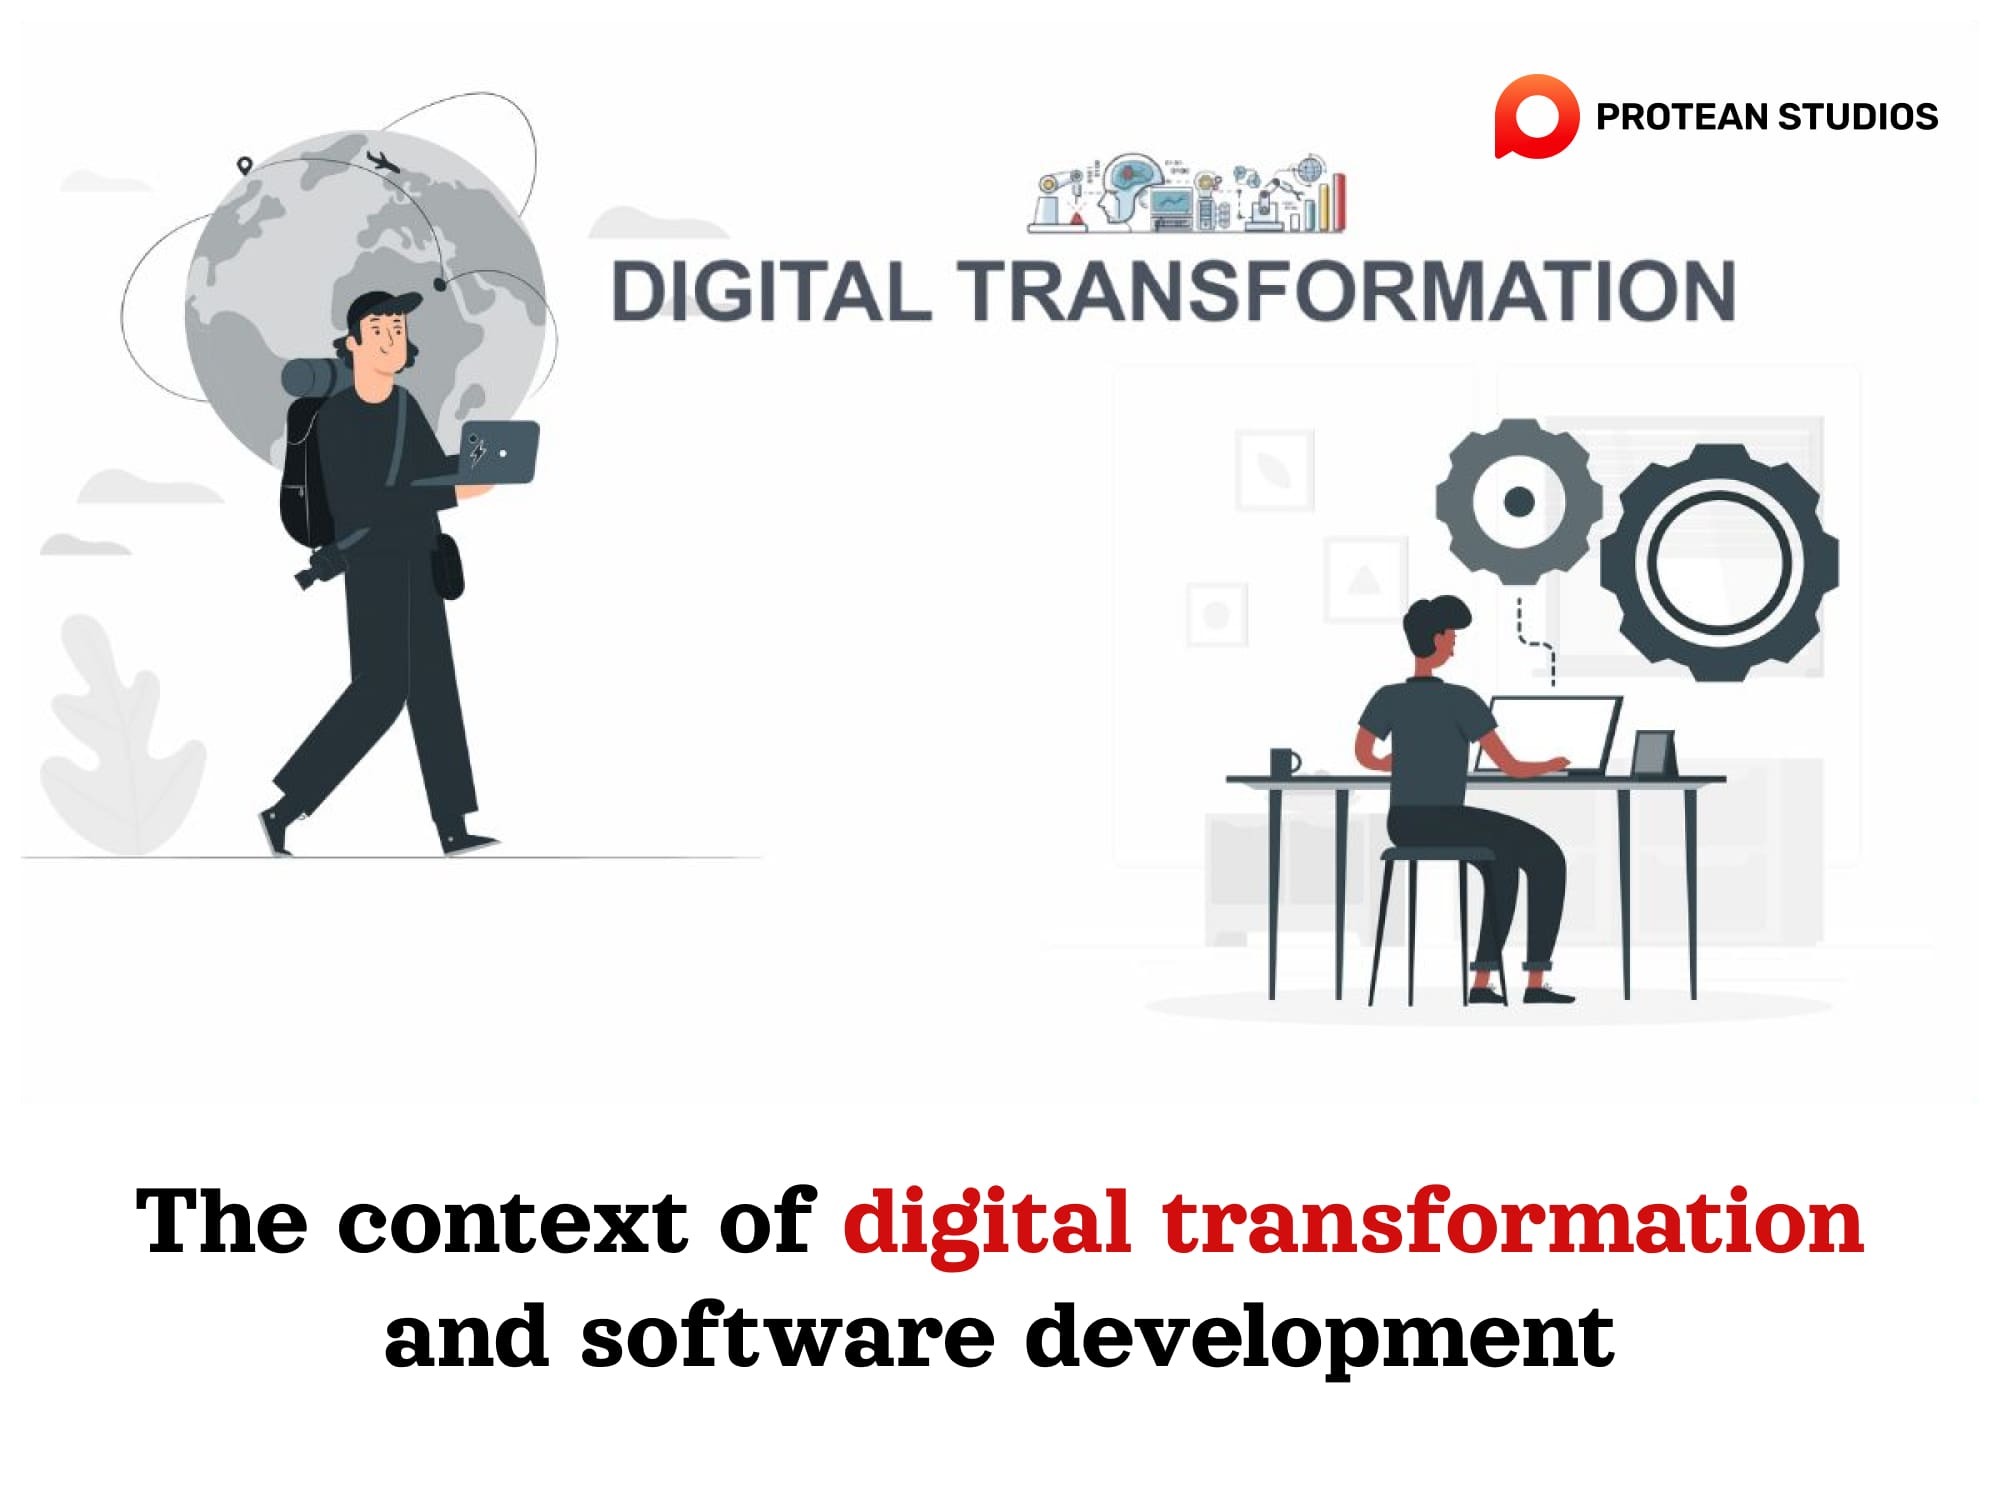 Features of DX and software development